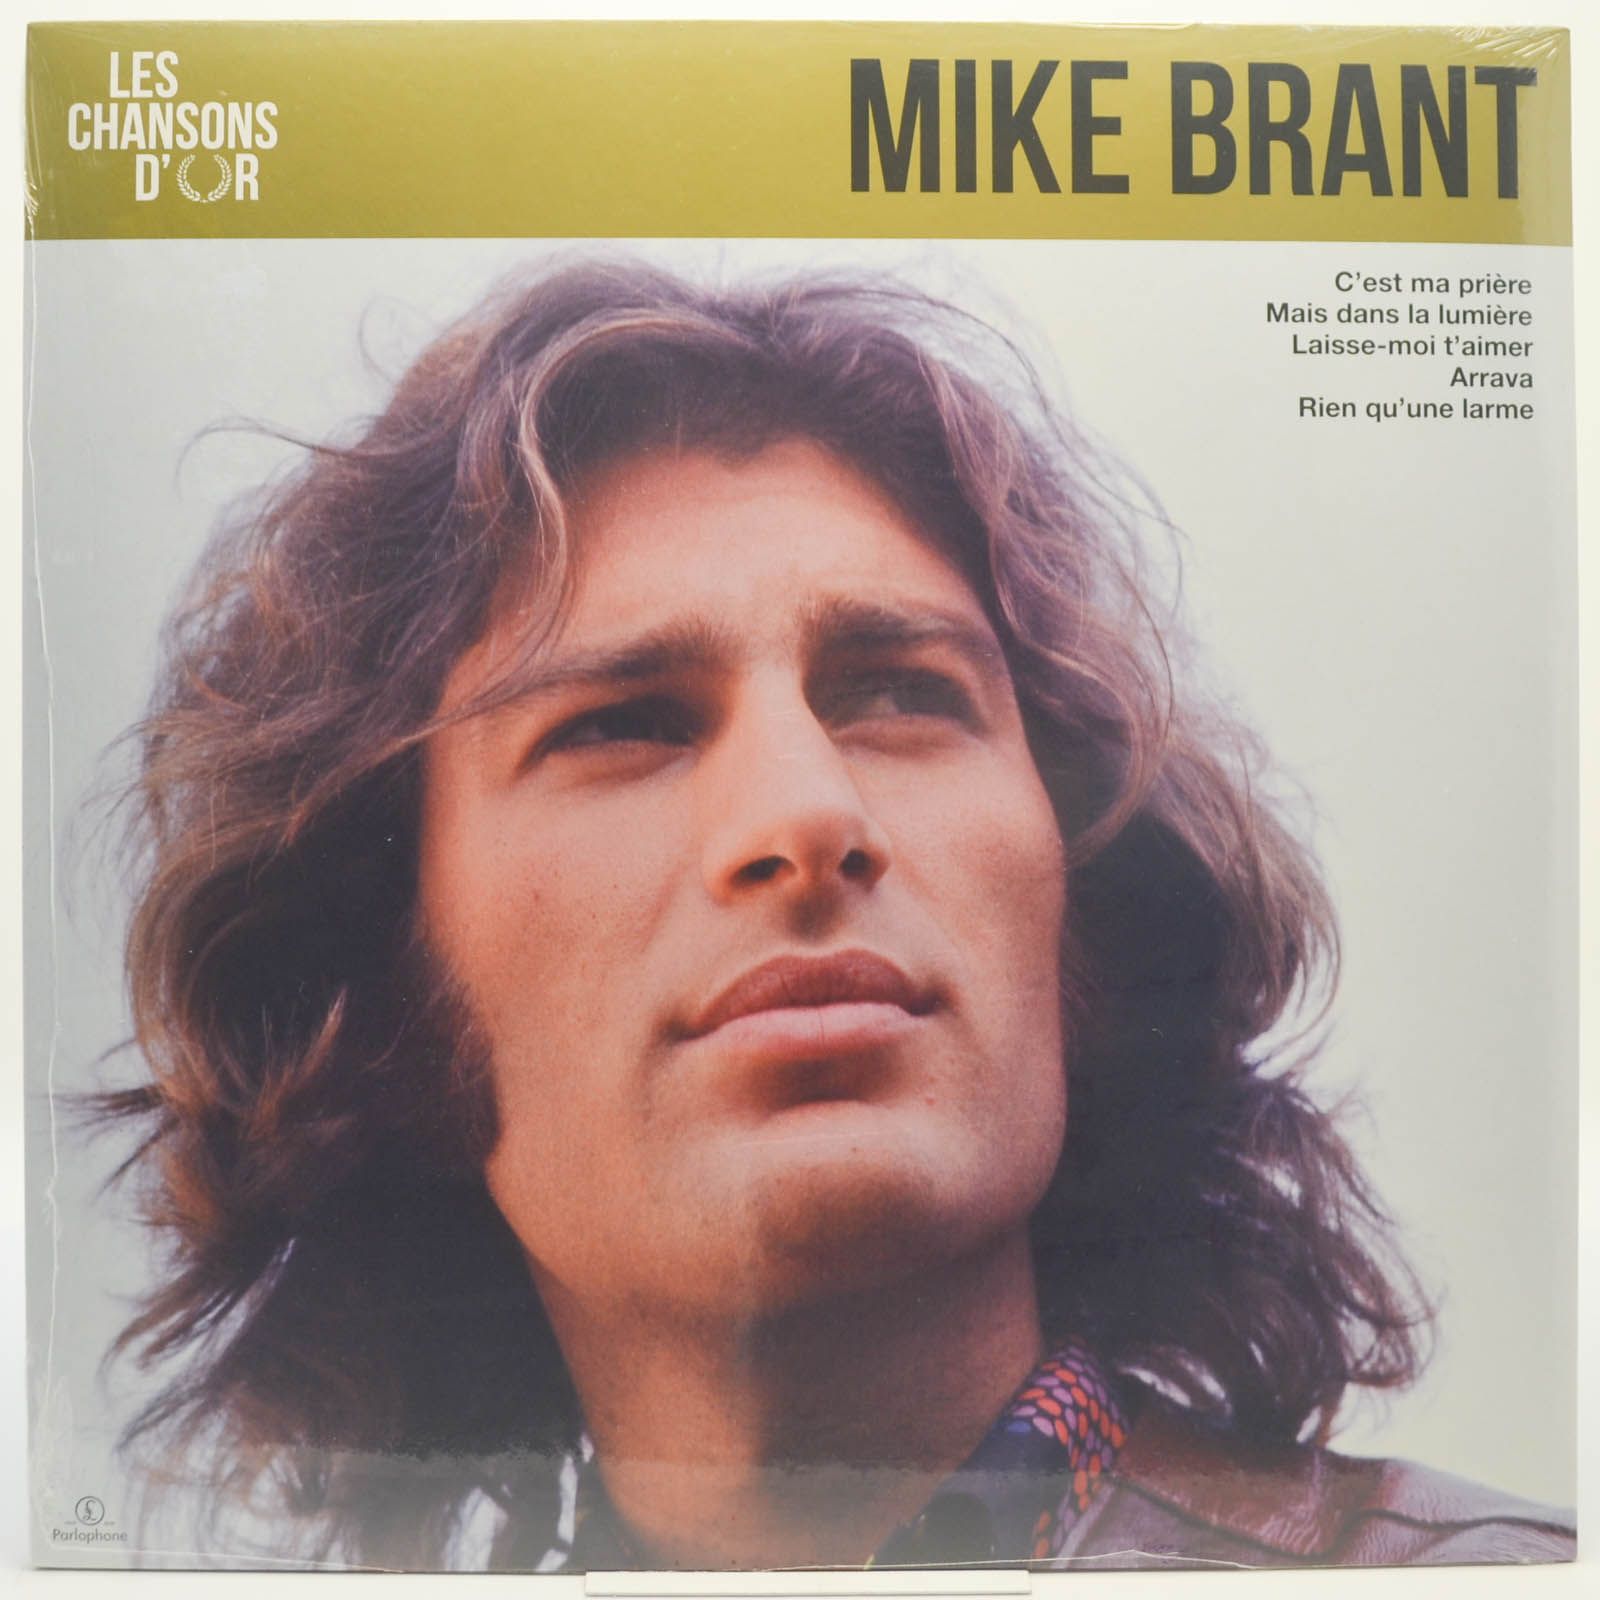 Mike Brant — Les Chansons D'or (France), 2020